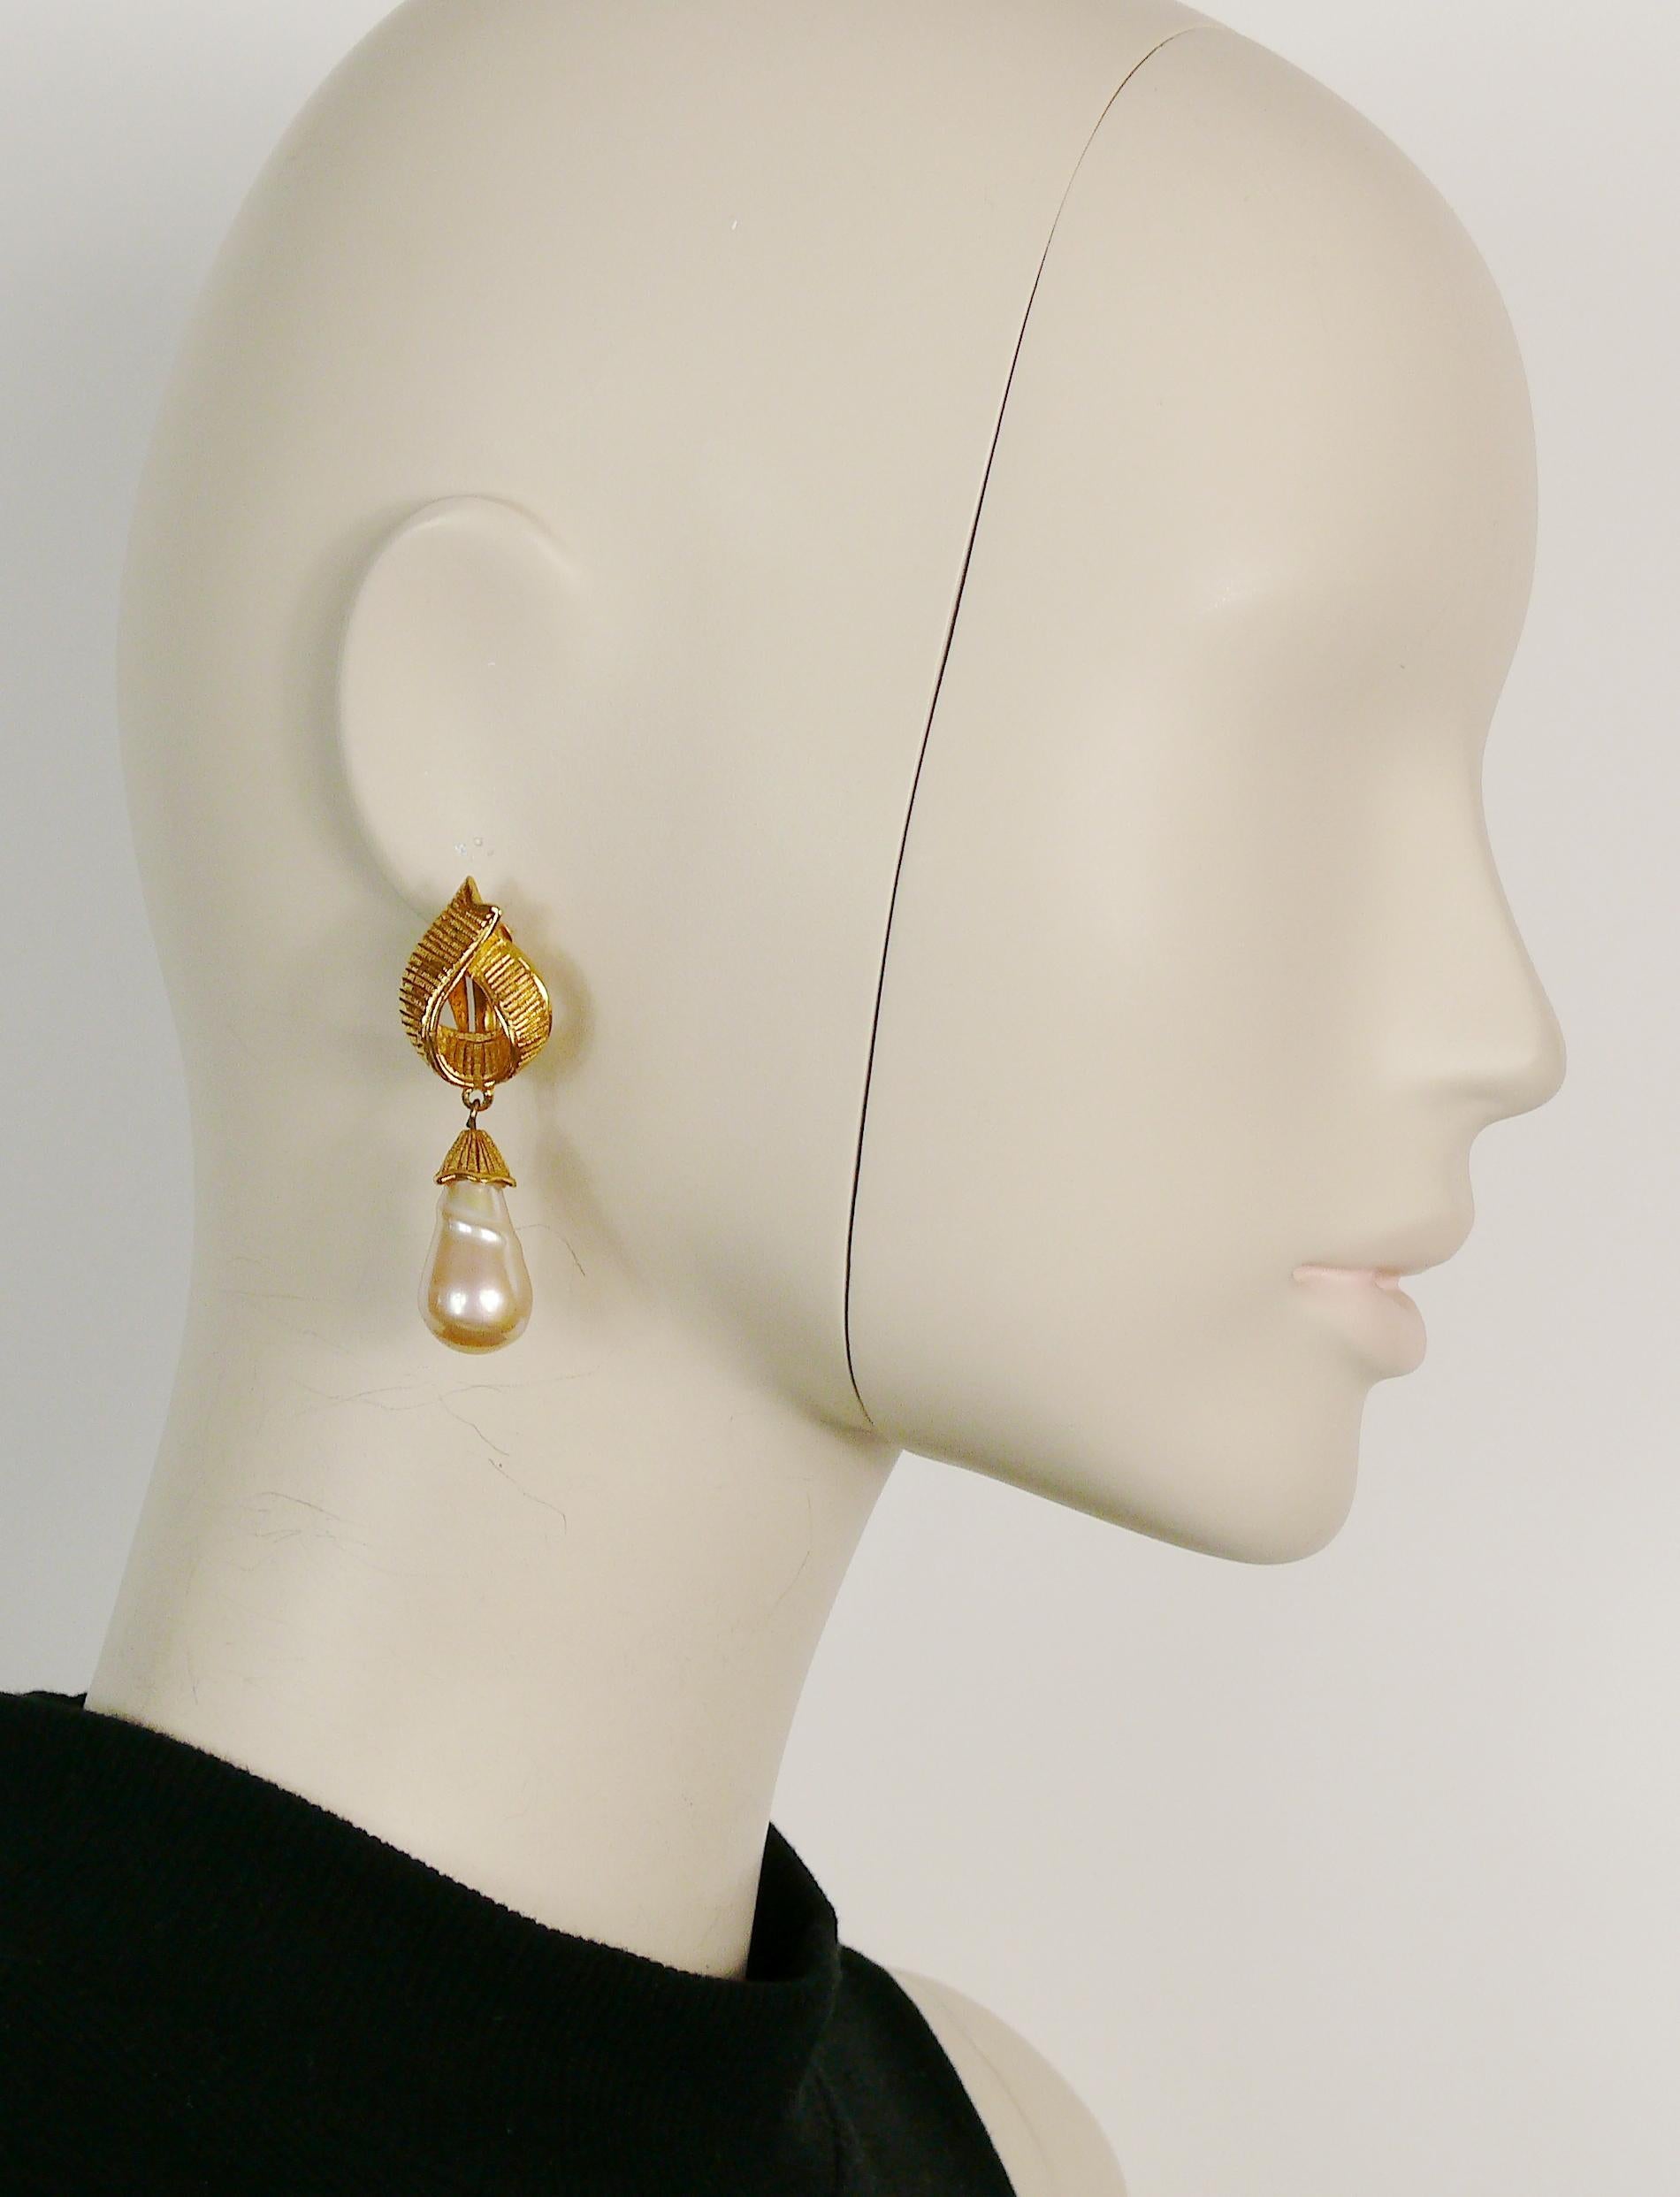 YVES SAINT LAURENT vintage gold toned ribbed textured ribbon design dangling earrings (clip-on) featuring a large faux pearl drop.

Marked YSL.
Made in France.

Indicative measurements : height approx. 5.6 cm (2.20 inches) / max. width approx. 1.9